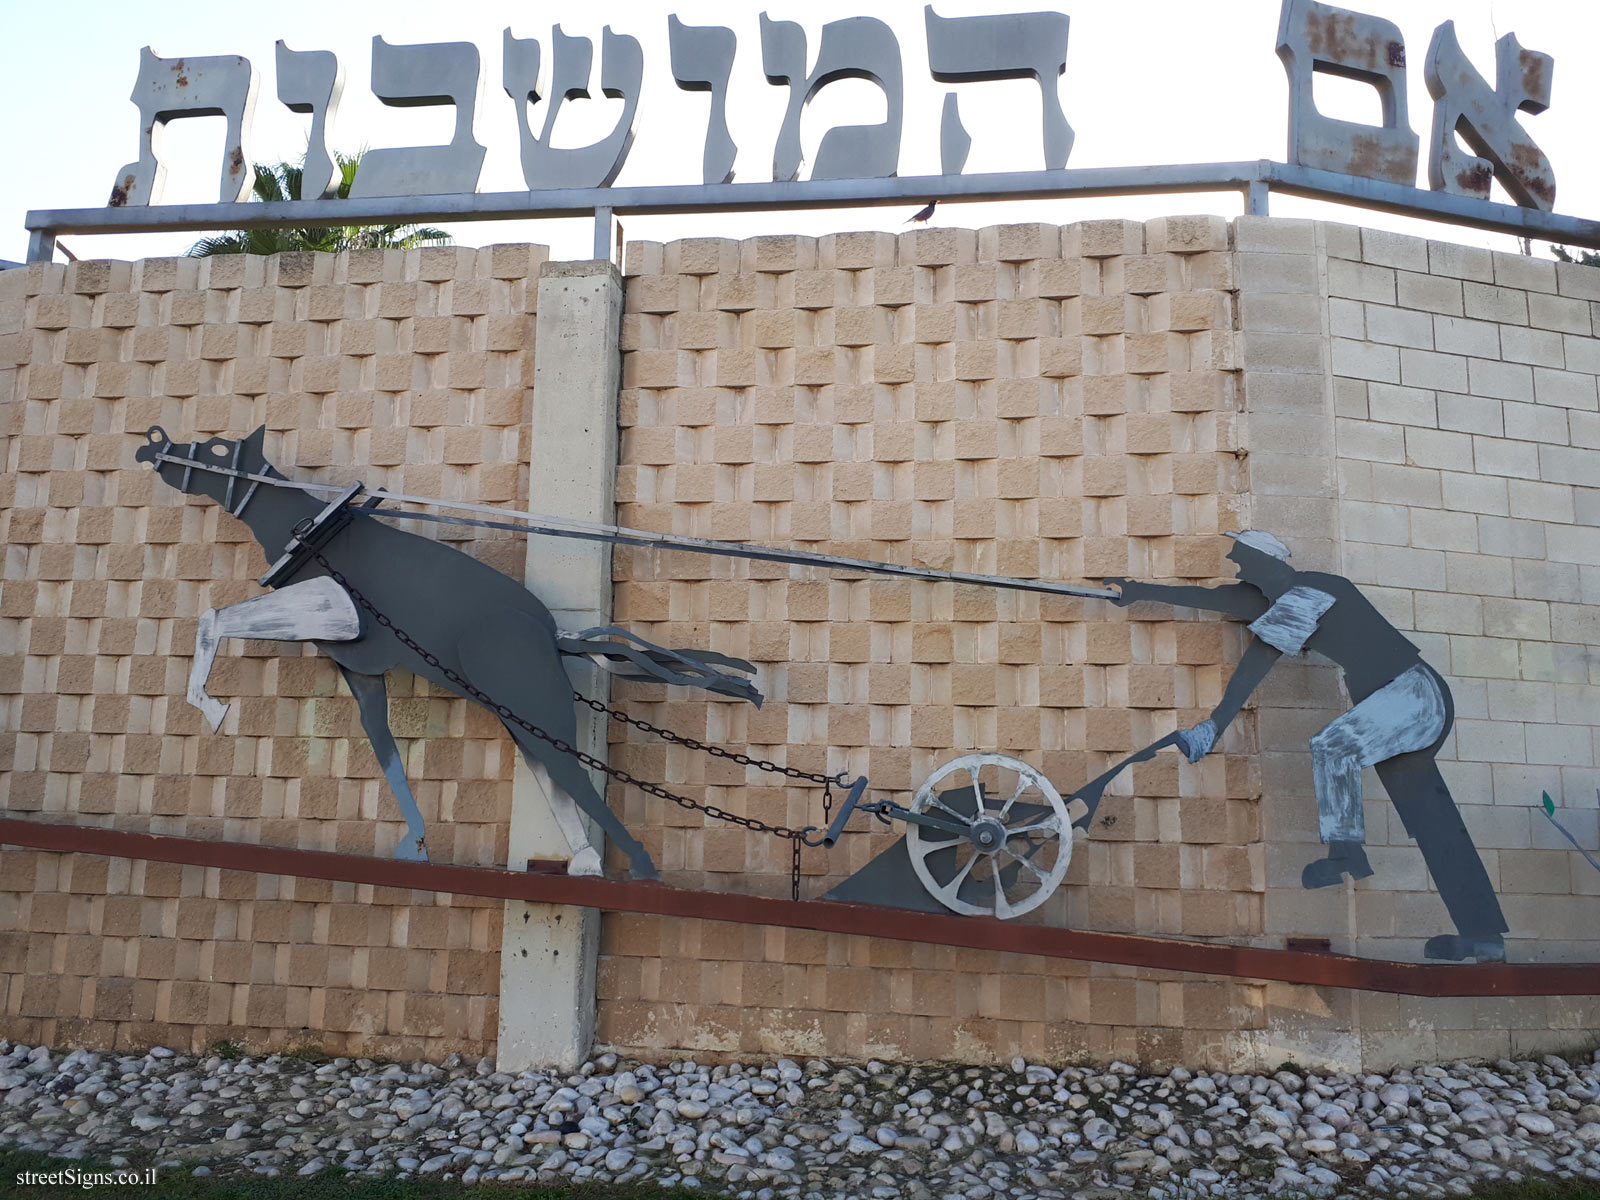 Petach Tikvah - the entrance statue to the city, figures of the city’s founders